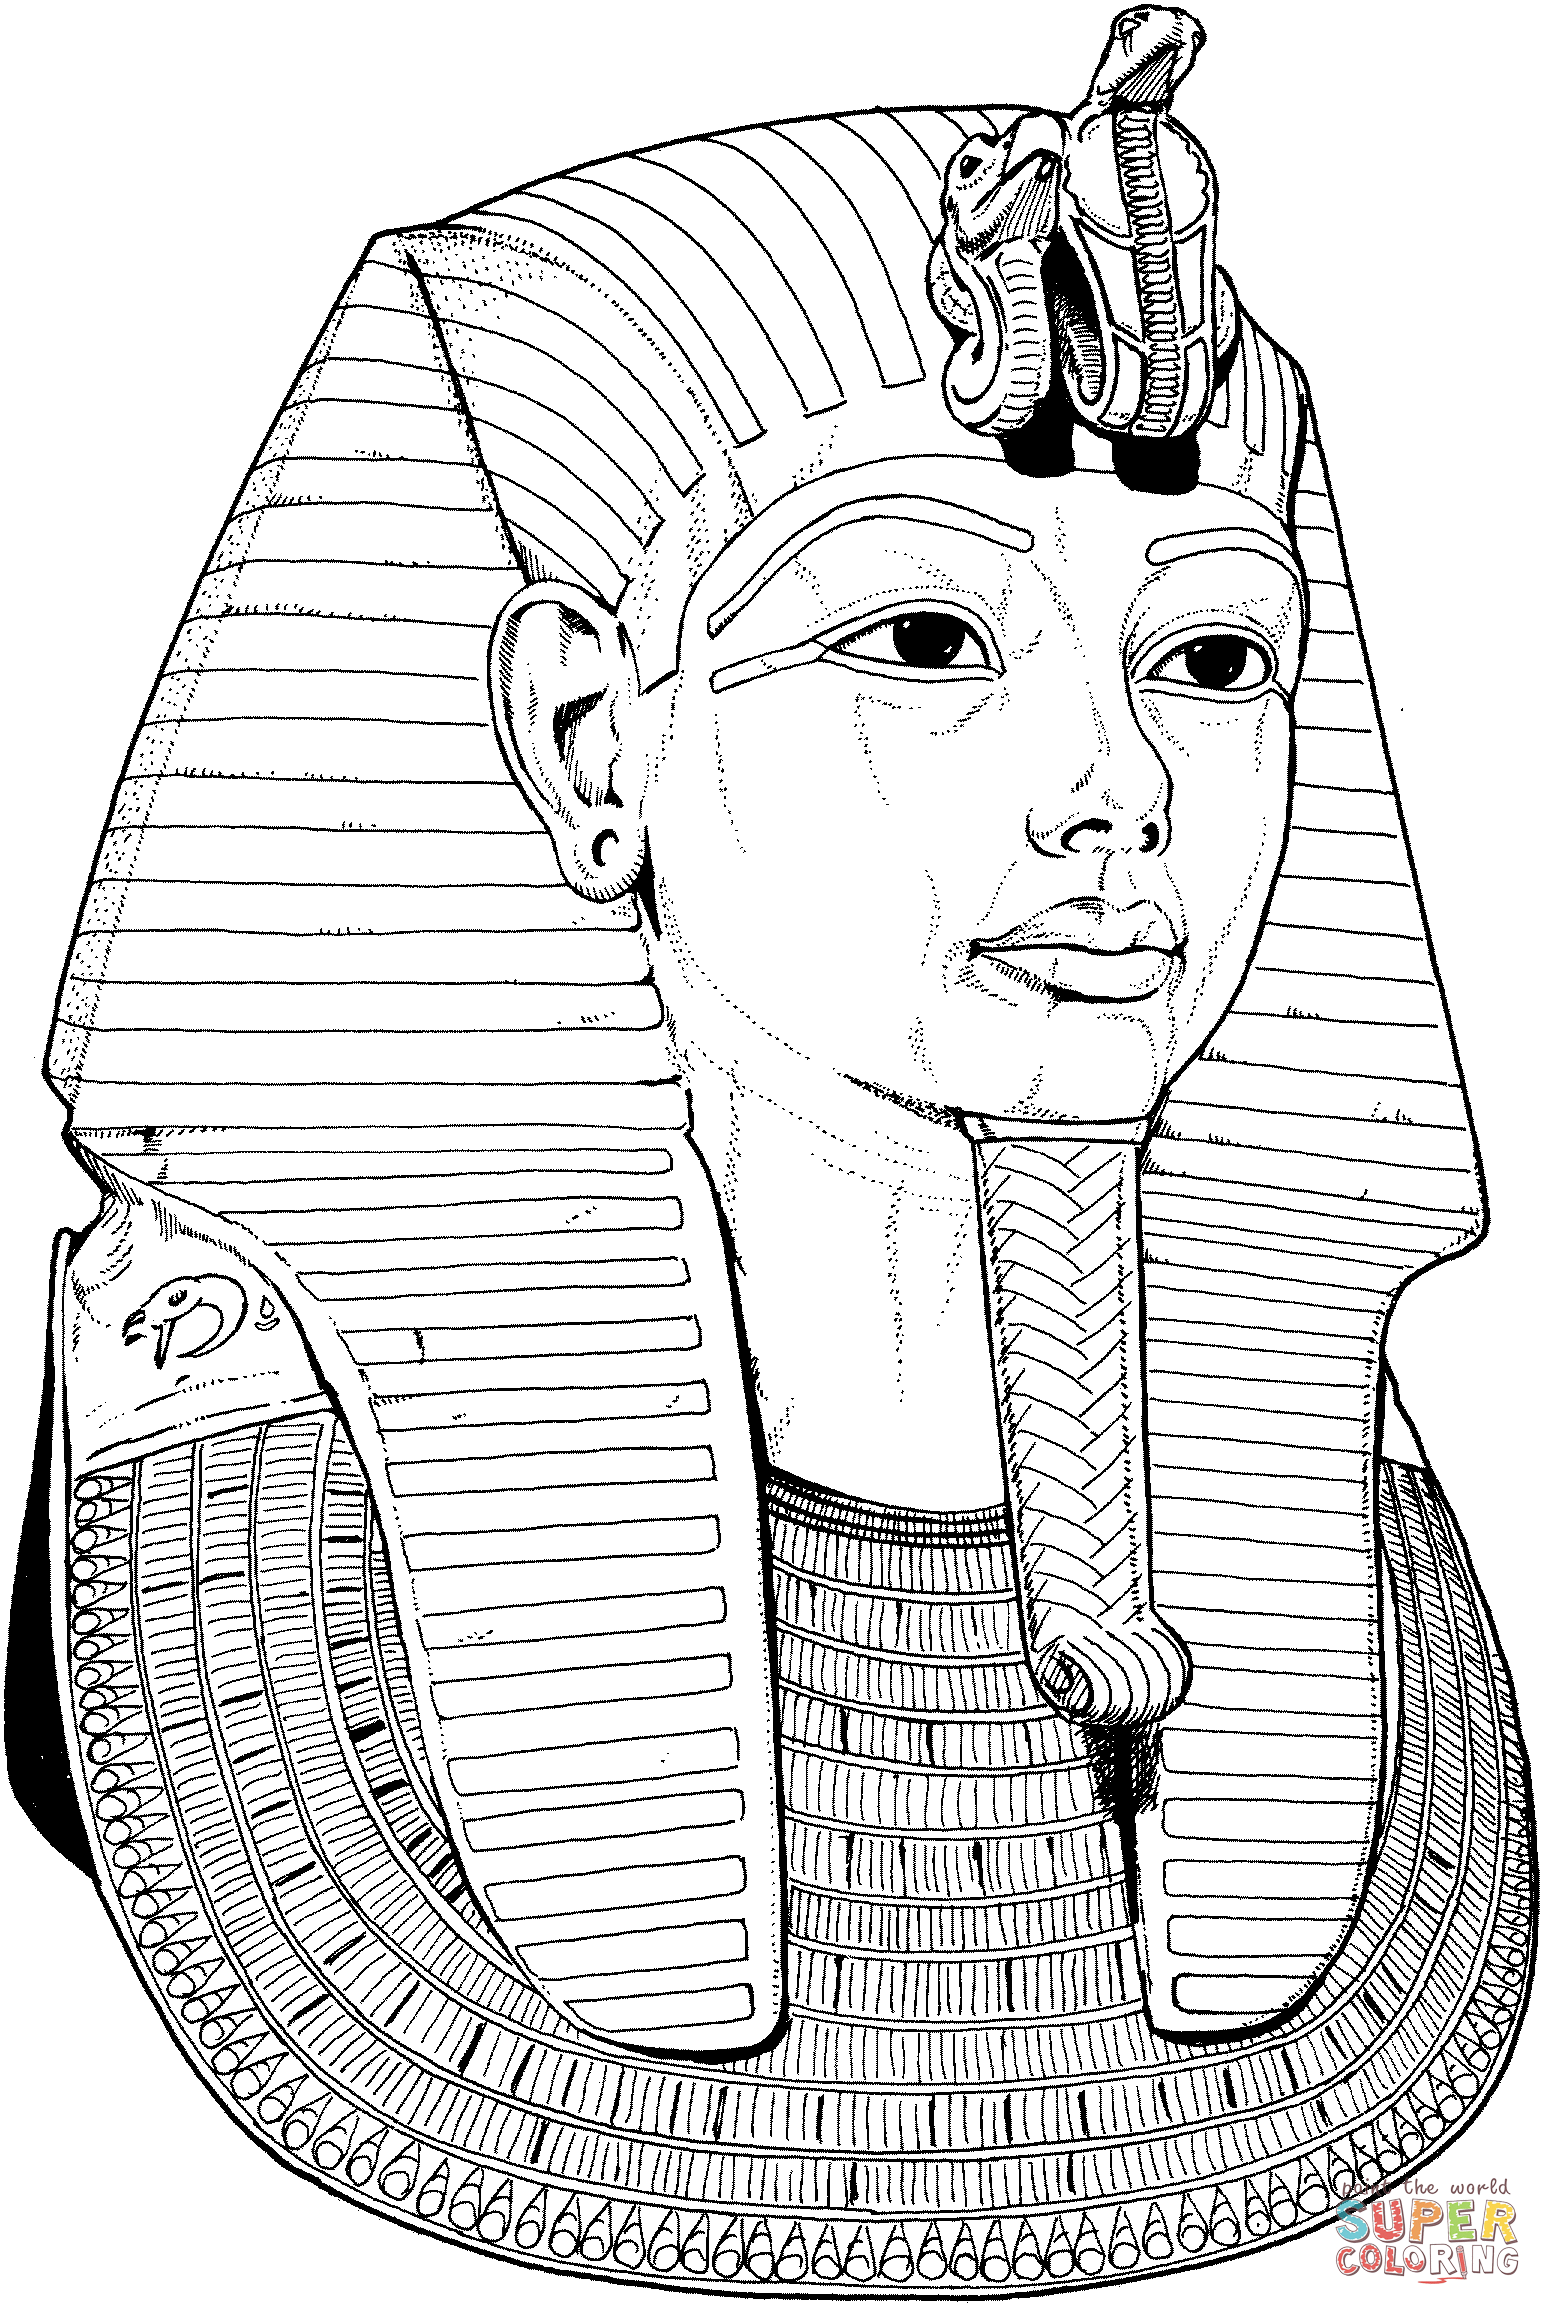 Tutankhamun death mask coloring page free printable coloring pages